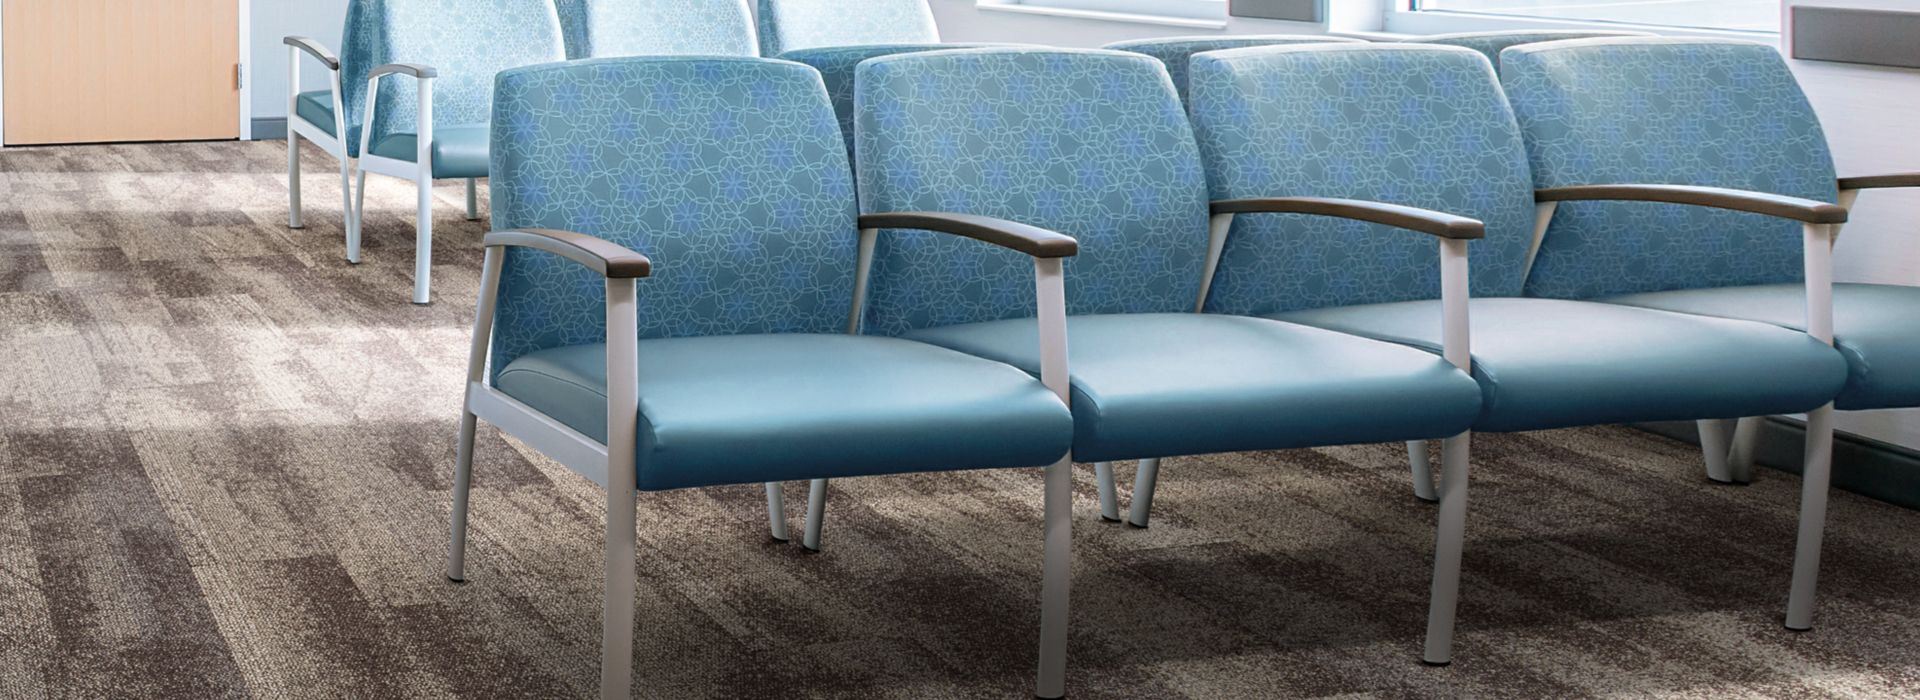 Interface Neighborhood Smooth plank carpet tile in waiting room with blue chairs numéro d’image 1